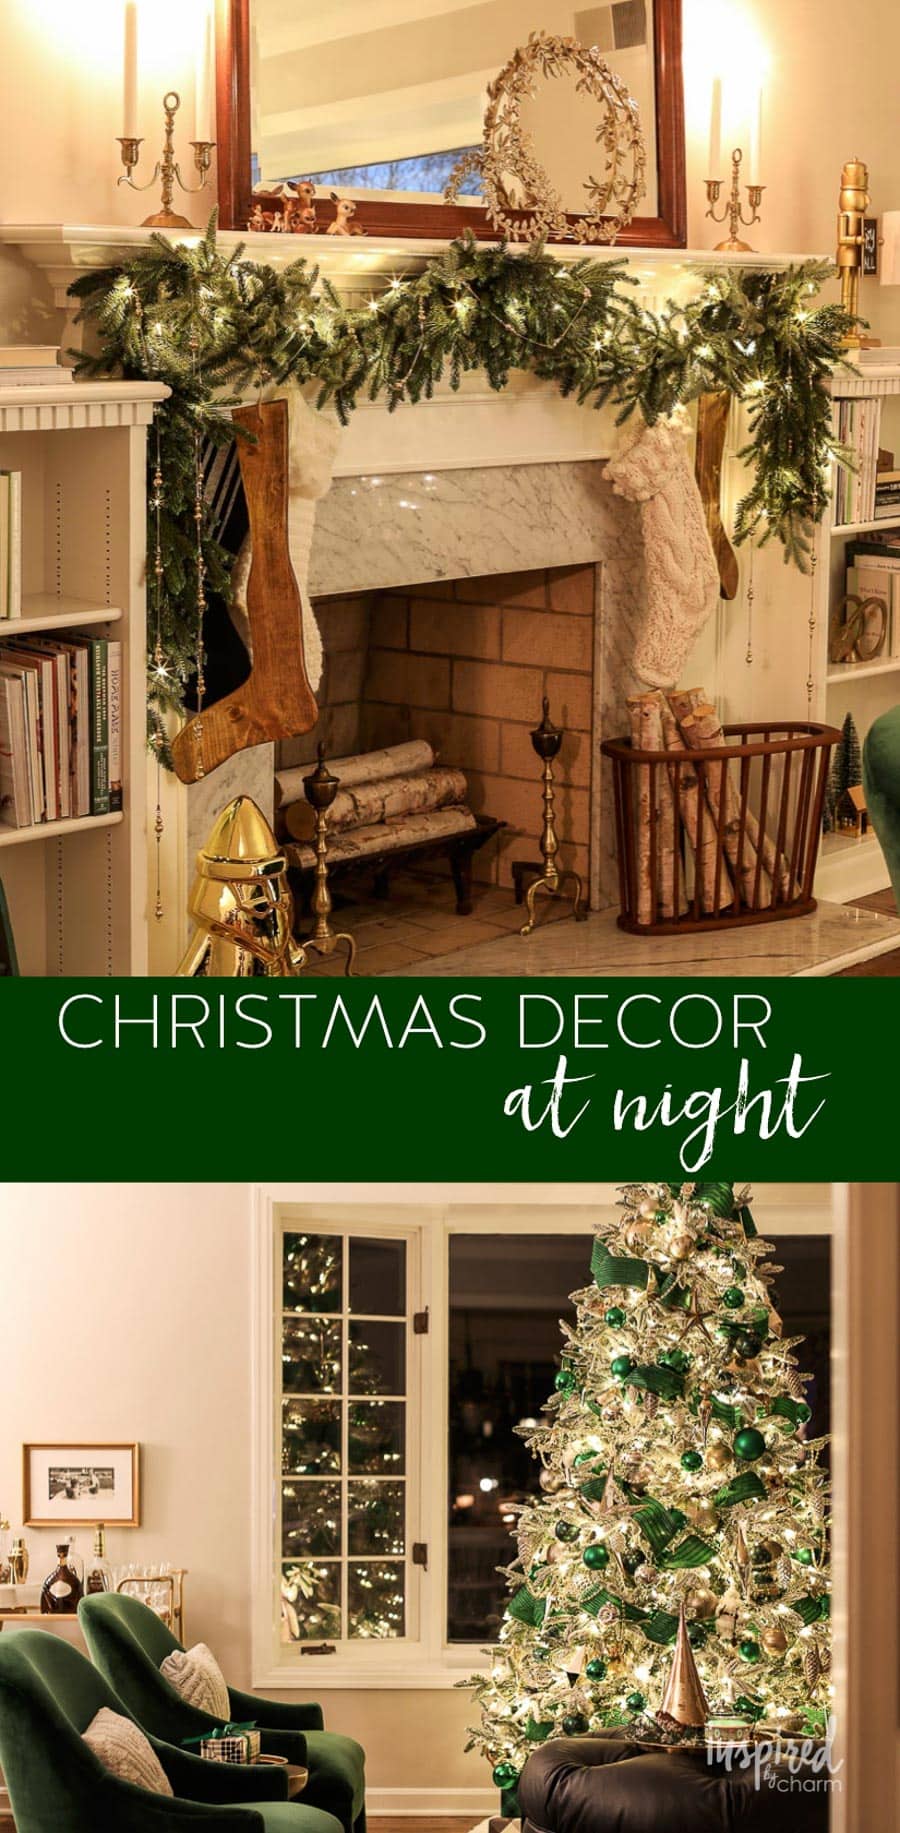 Christmas Decor at Night - Evening at Bayberry House: Christmas 2018 #christmas #holiday #decor #decorations #night #evening #hometour